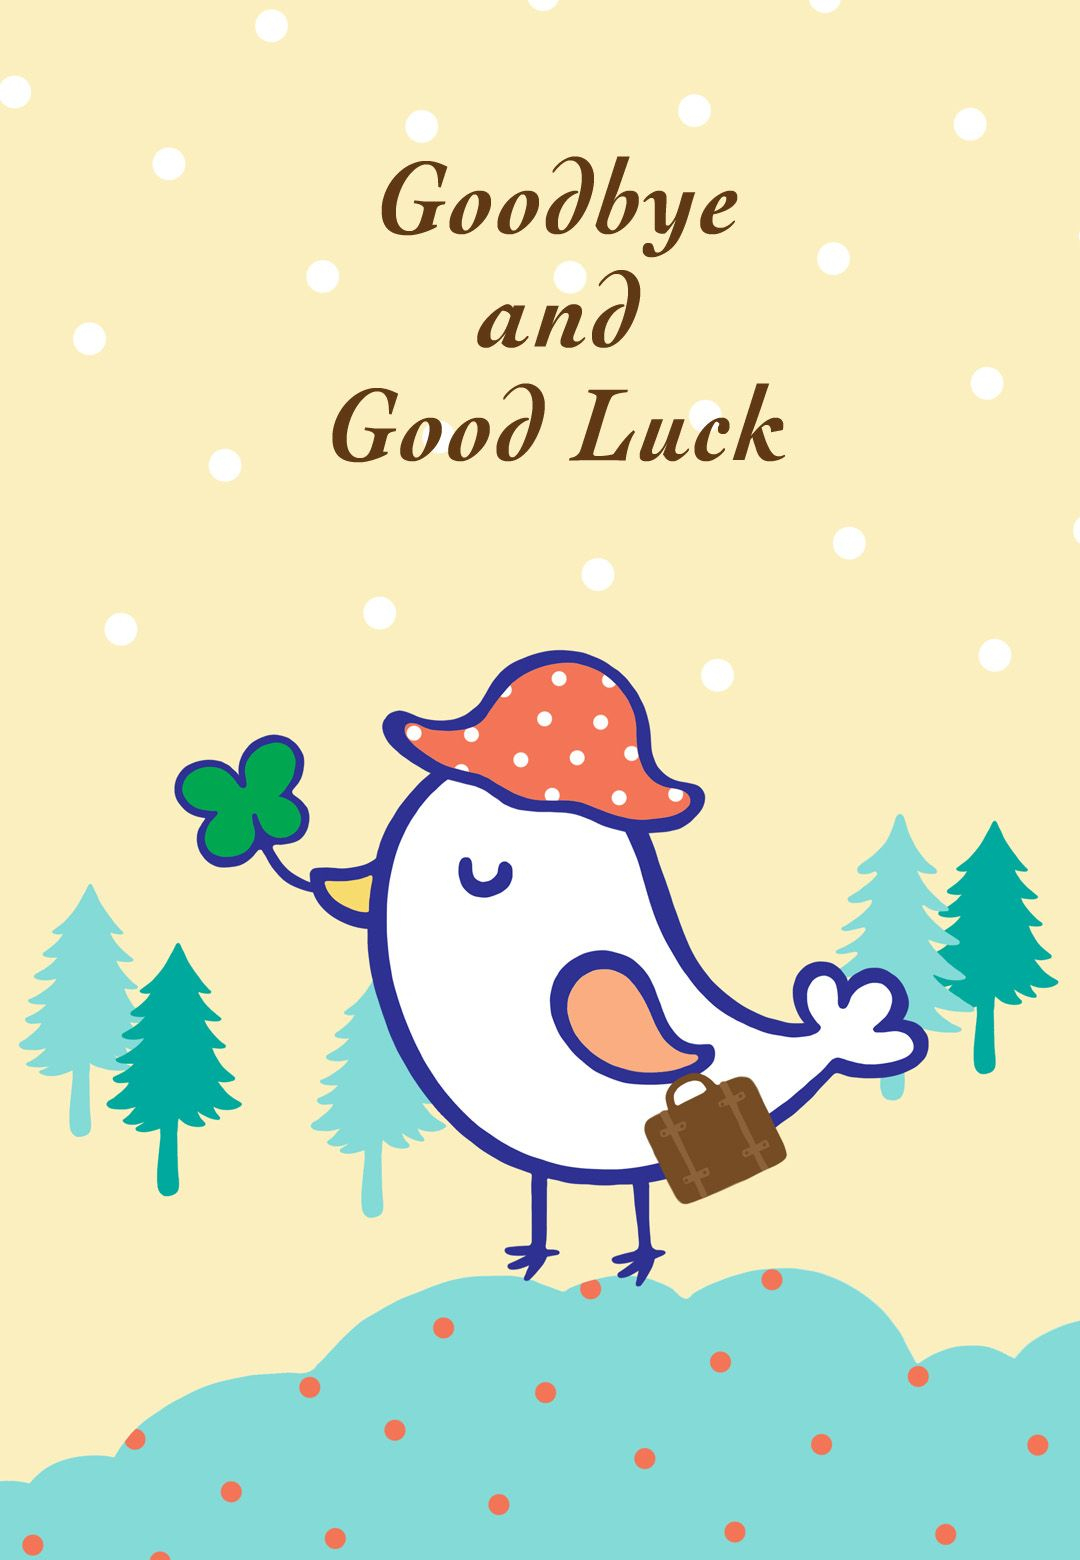 Free Printable Goodbye And Good Luck Greeting Card | Littlestar - Free Printable Cards No Download Required